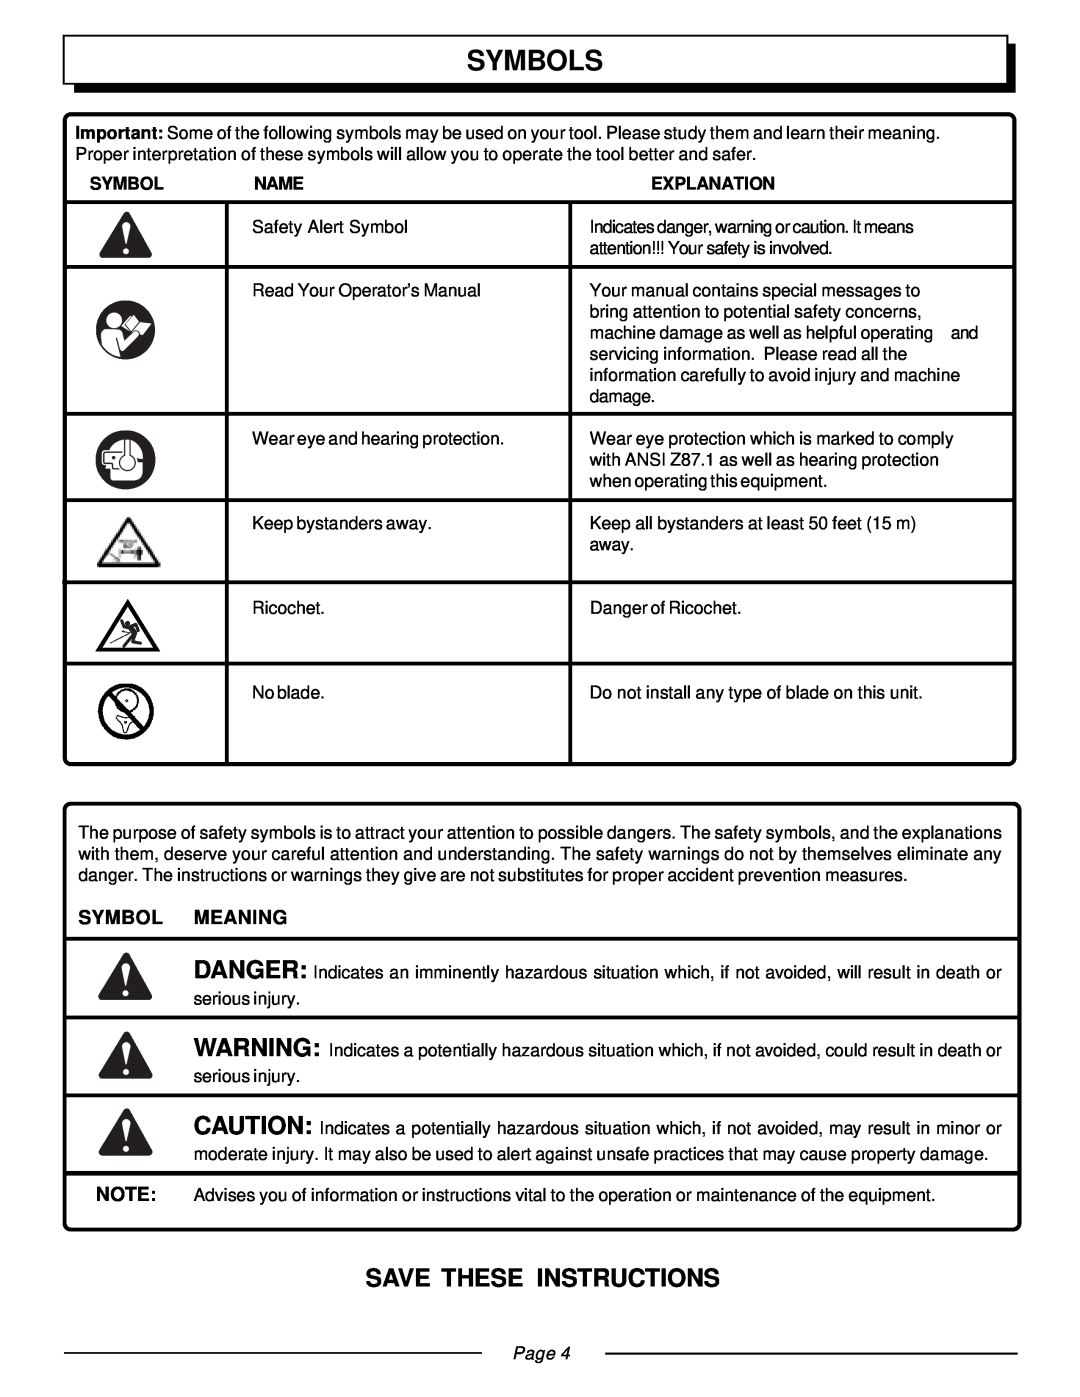 Homelite UT20811E manual Symbols, Save These Instructions, Symbol Meaning, Name, Explanation, Page 